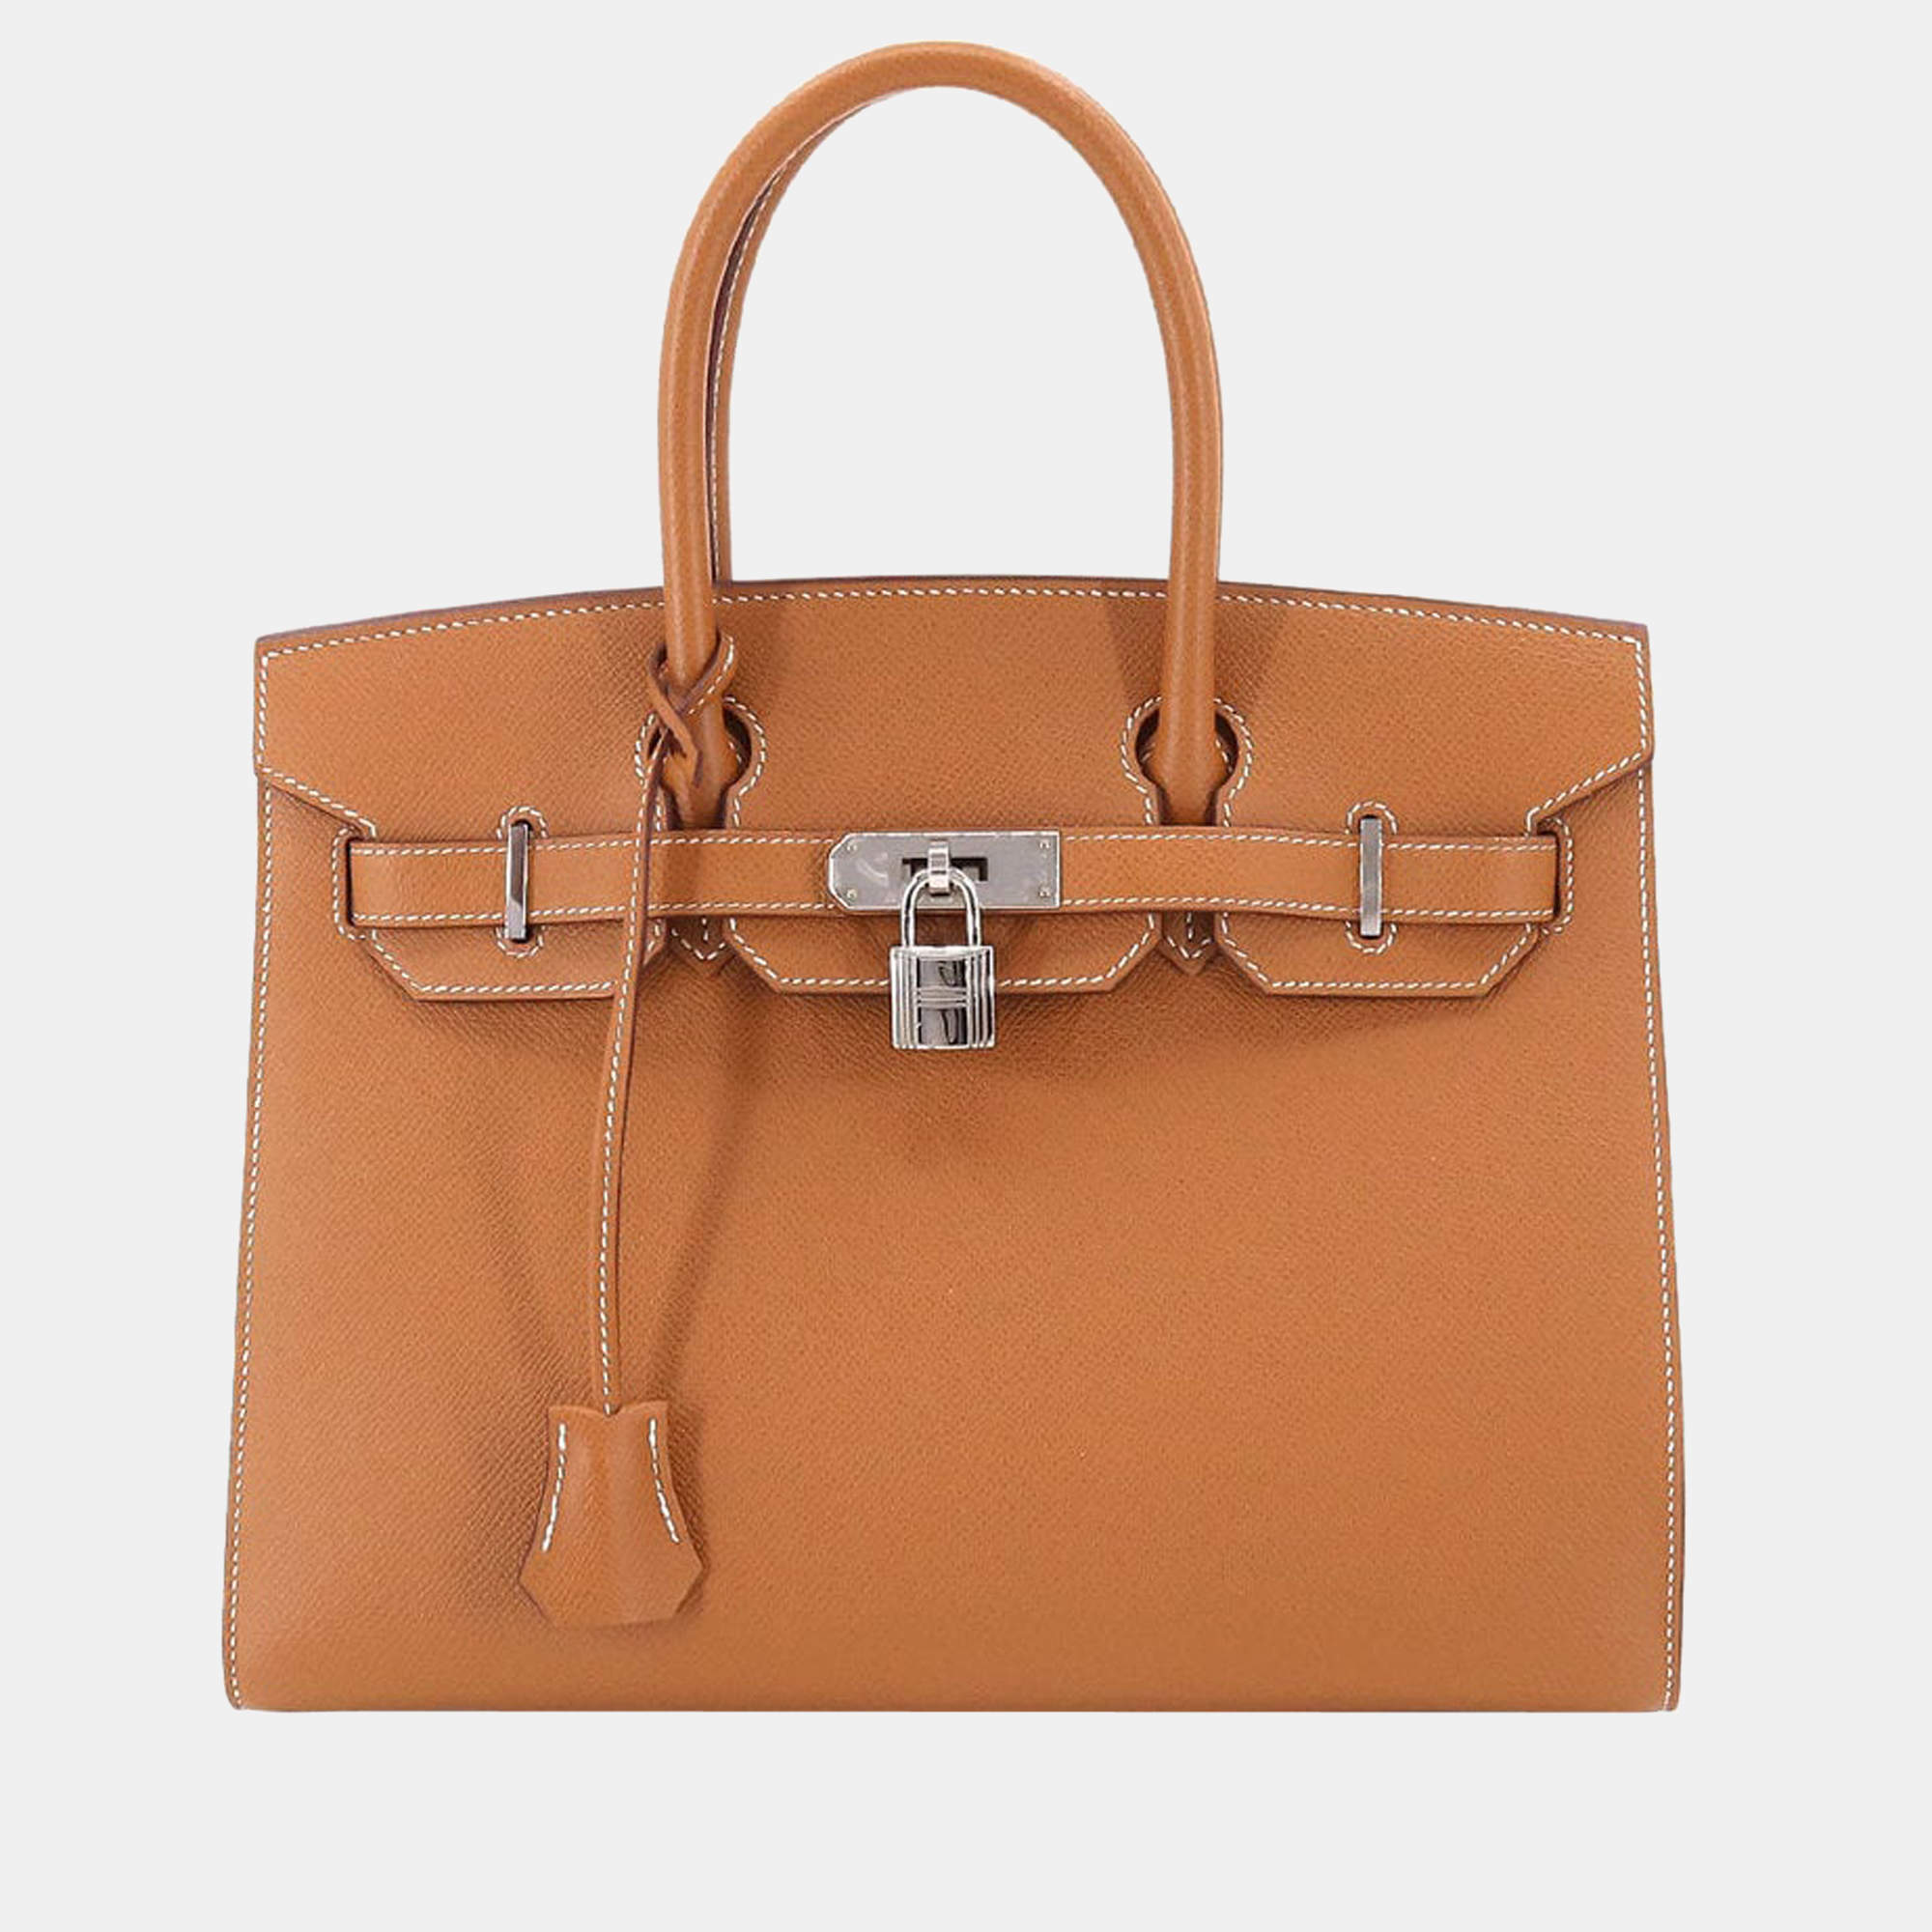 Hermes Picotin Lock PM 18 Etoupe Taurillon Clemence Handbag Y Stamped  (2020) Silver Hardware Gray Beige Popular Color Ladies Hermes